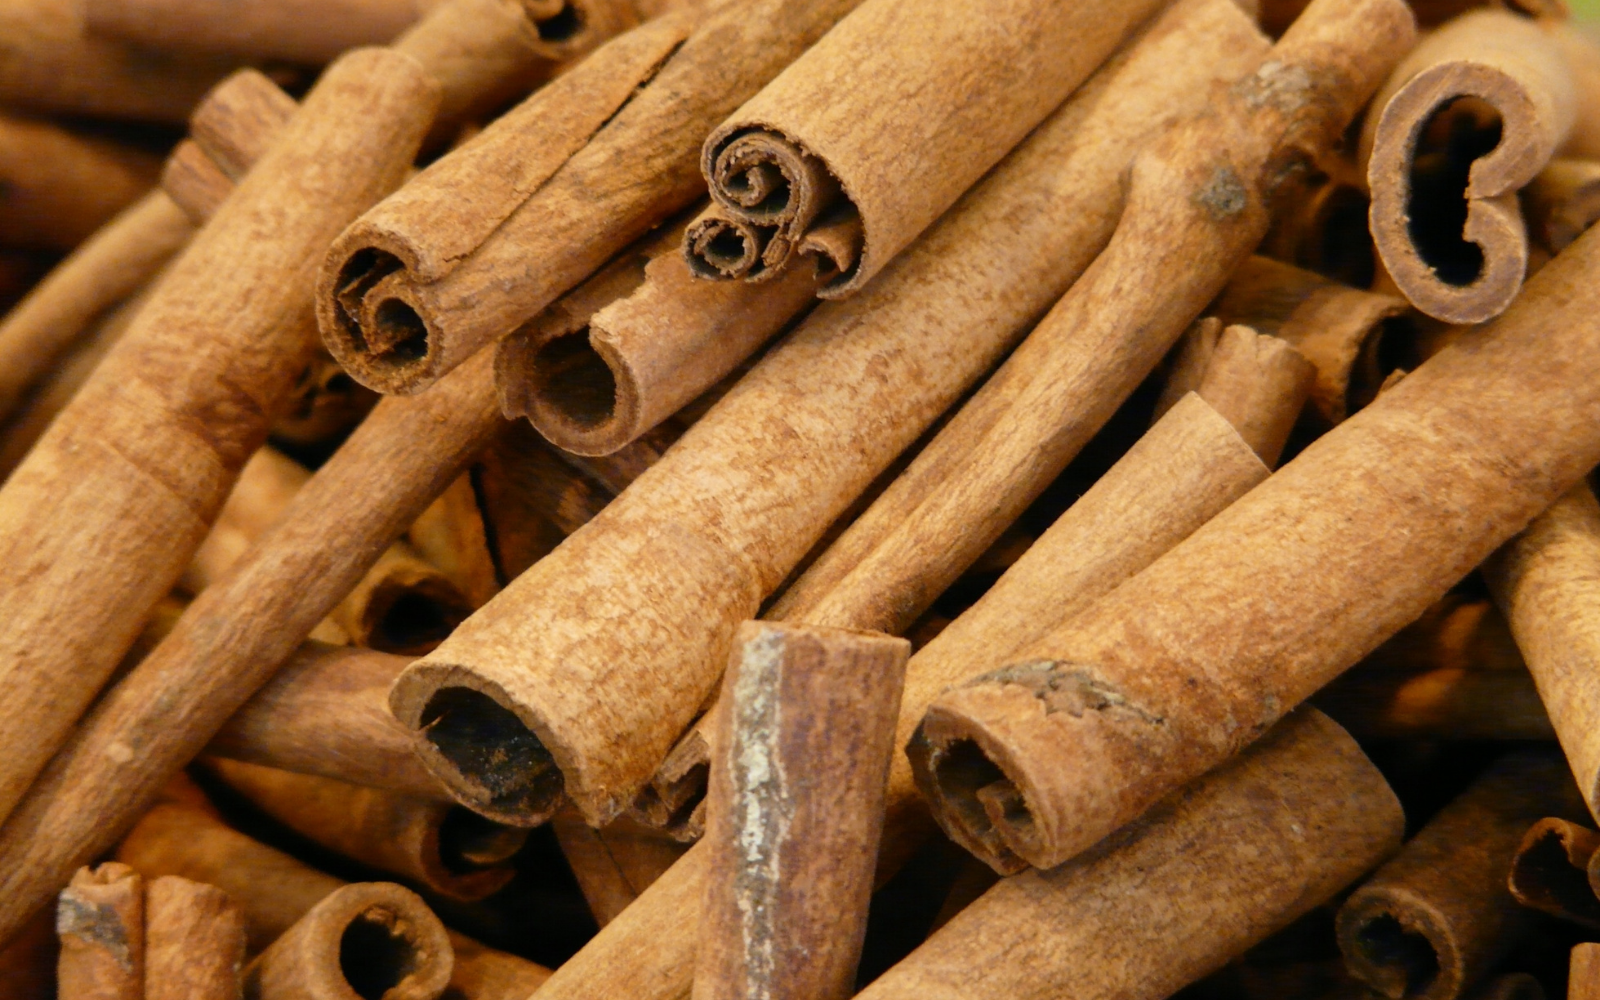 Can Babies Have Cinnamon? Our Experts Explain